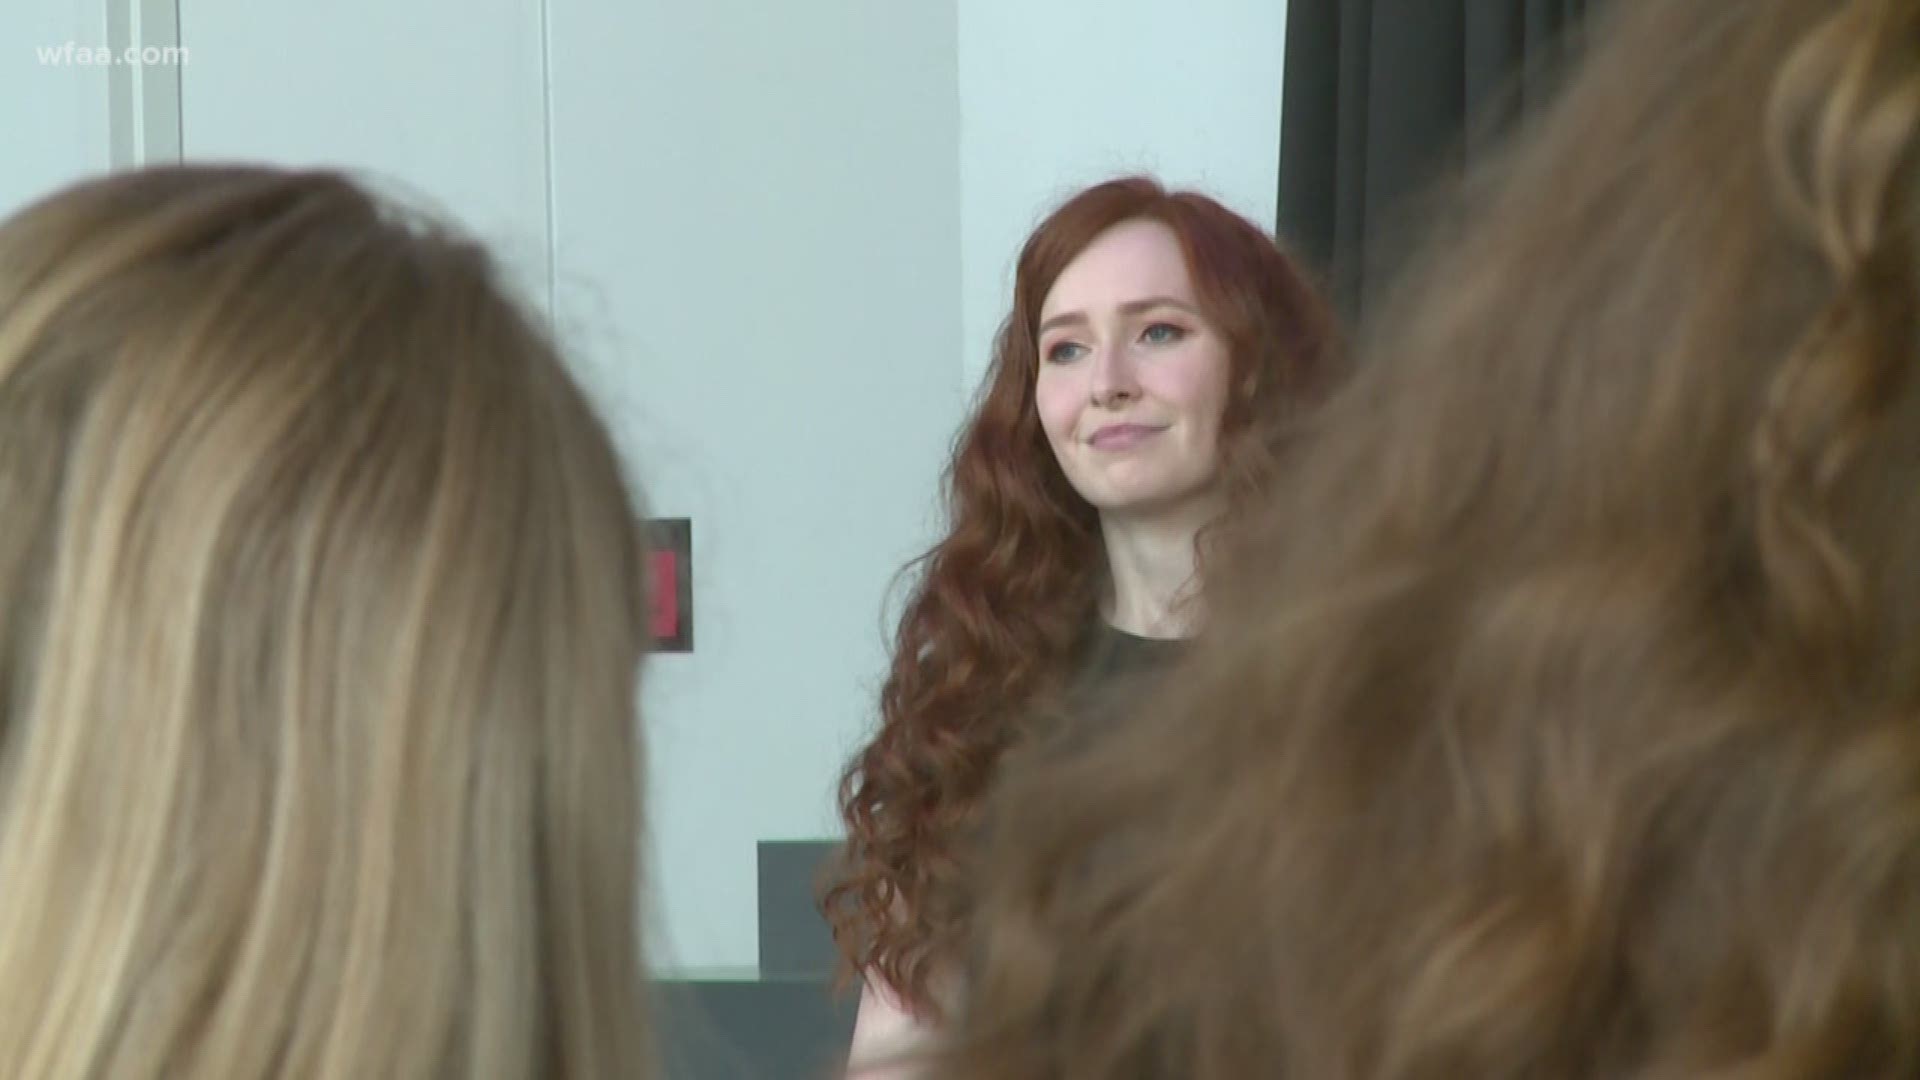 Students reach for the stars, meet musical group Celtic Woman